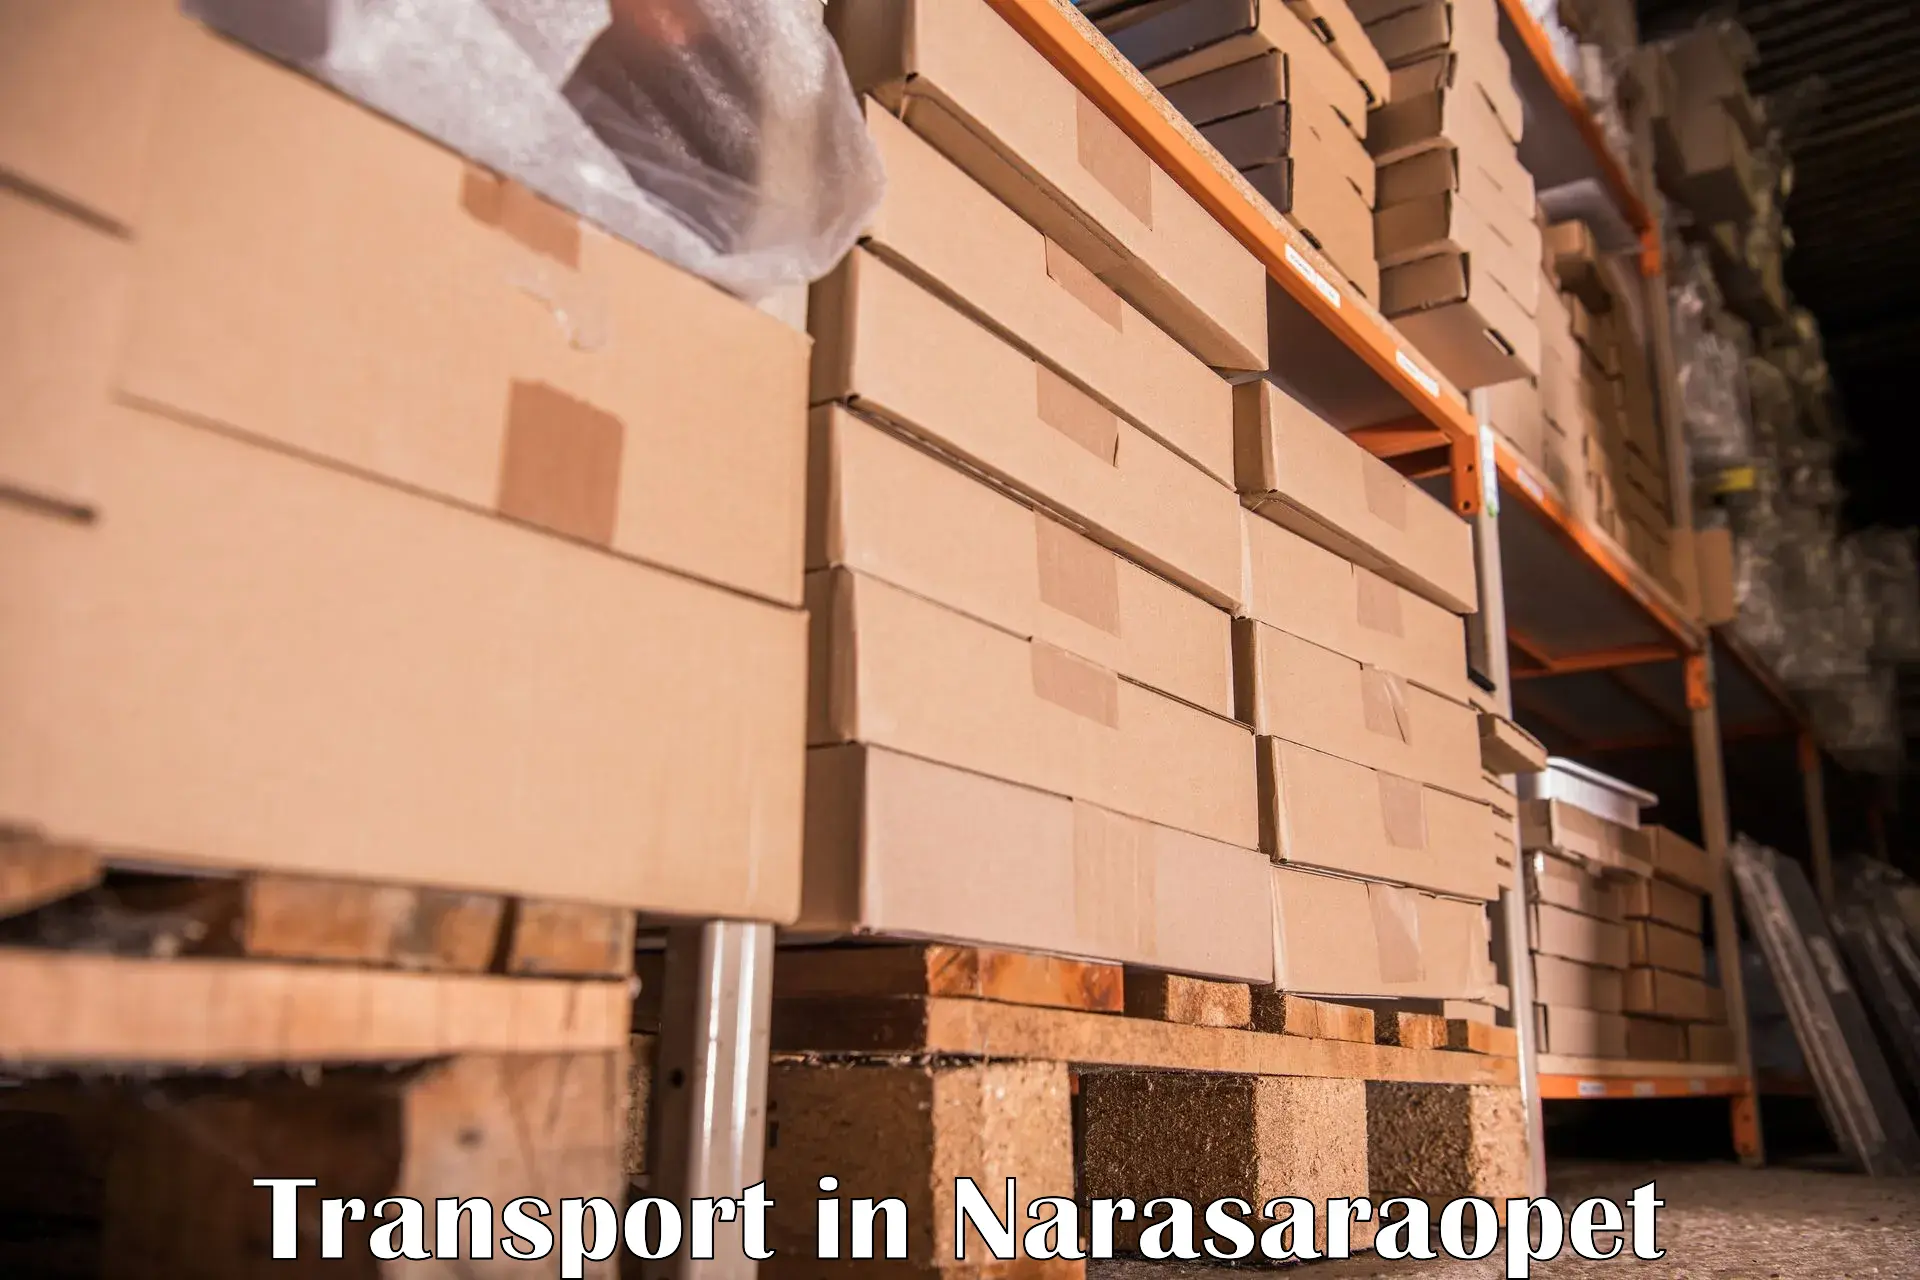 Air cargo transport services in Narasaraopet